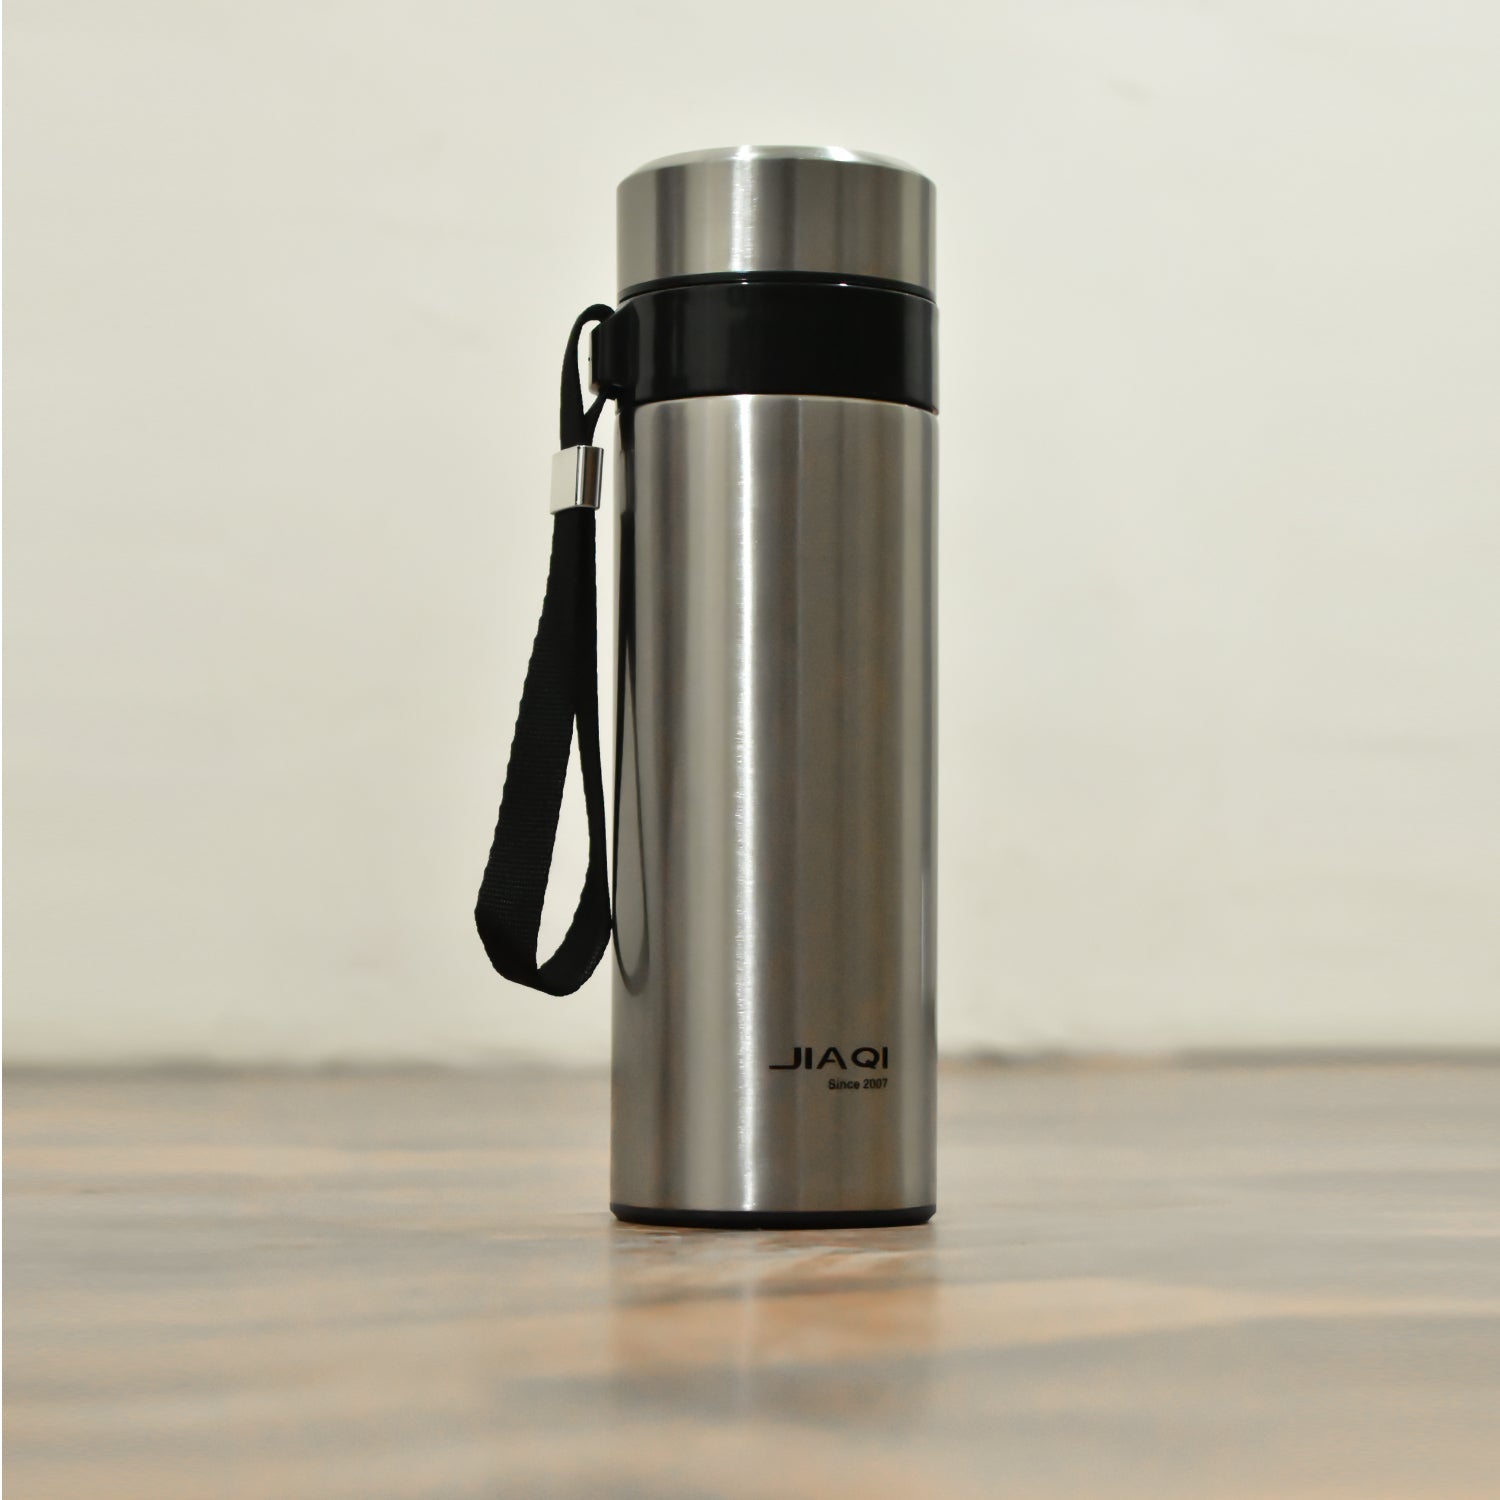 6416 stainless steel Bottles 400Ml Approx. For Storing Water And Some Other Types Of Beverages Etc.